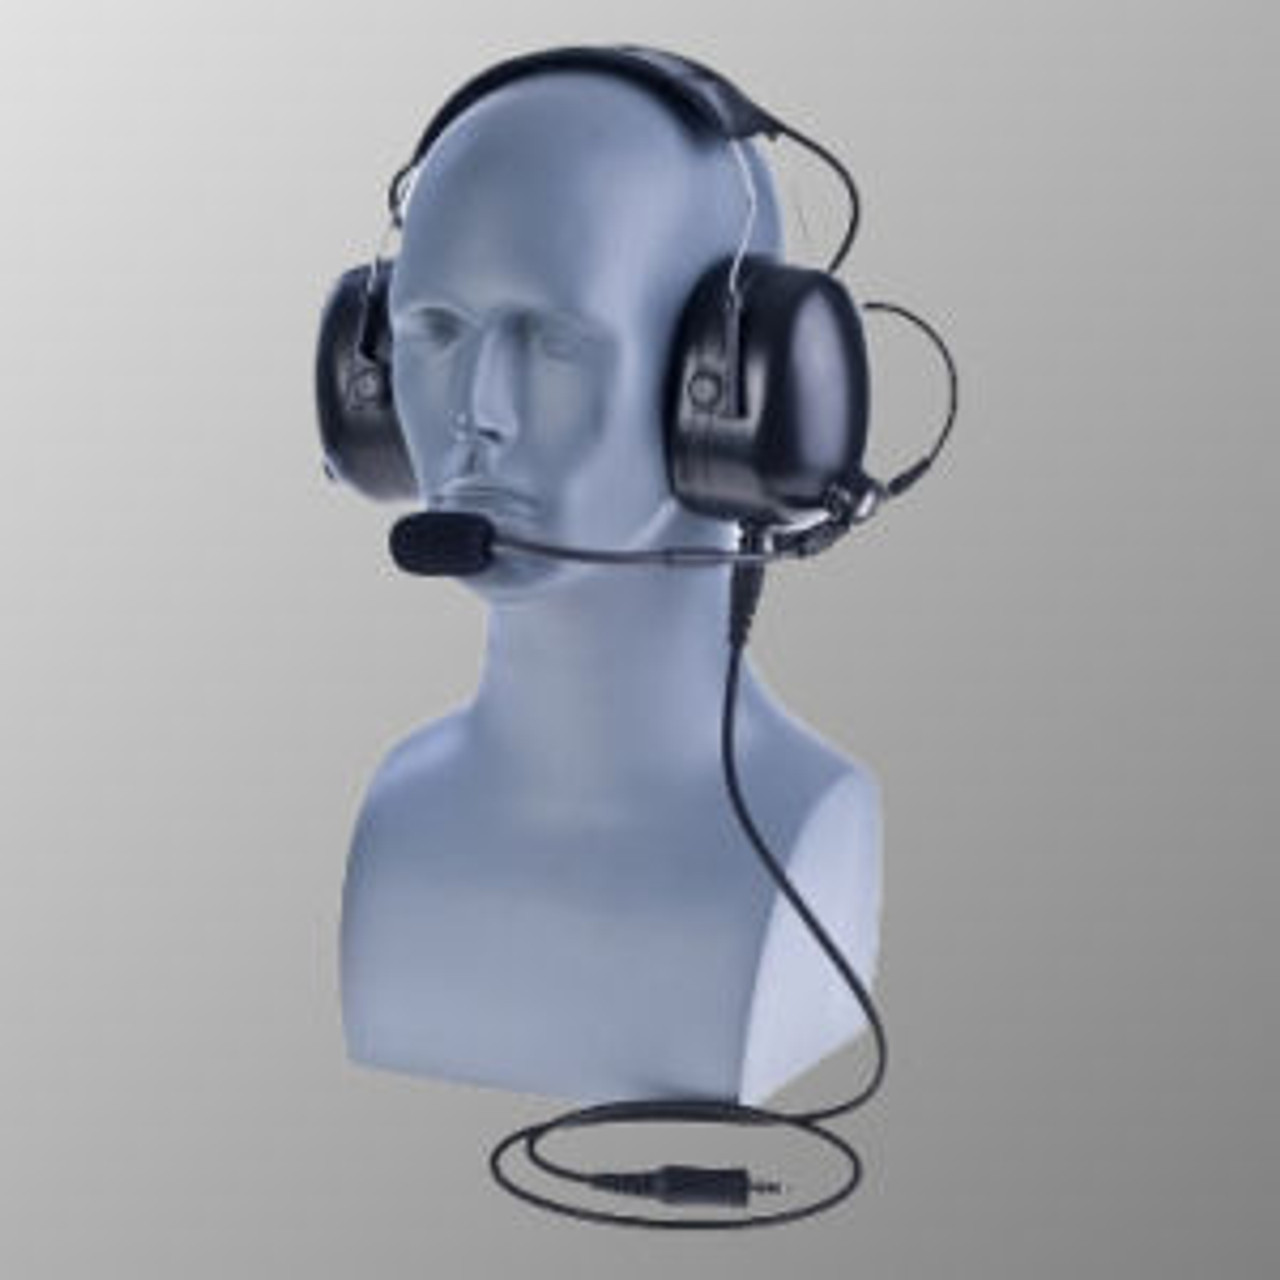 Motorola XPR3000 Over The Head Double Muff Headset With WIreless PTT